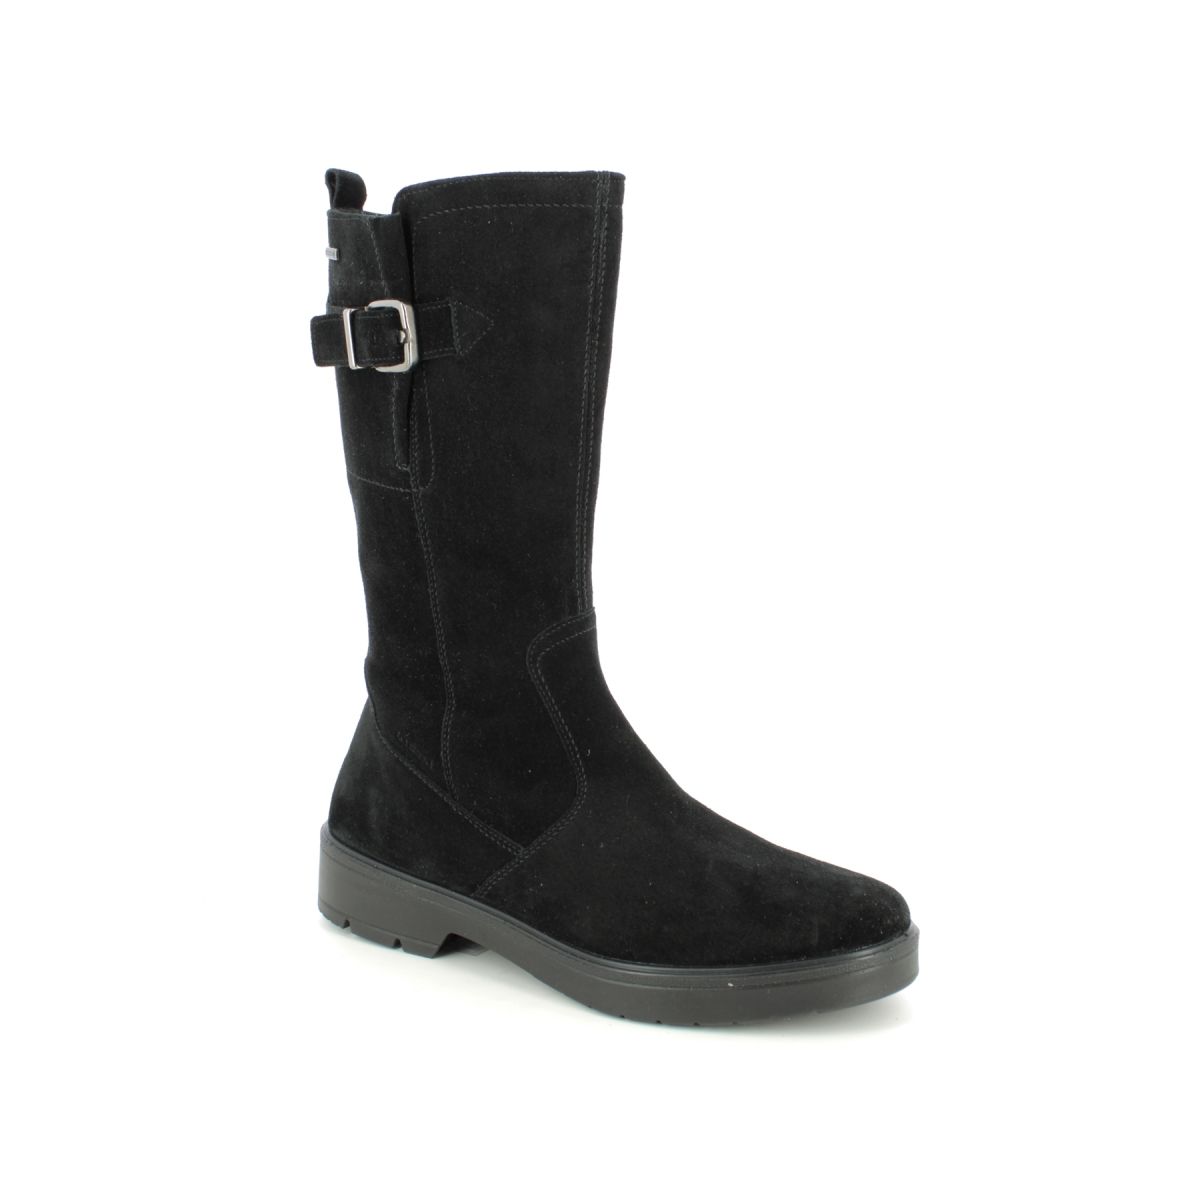 Legero Mystic Mid Gtx Black Suede Womens Mid Calf Boots 2000196-0000 In Size 4 In Plain Black Suede